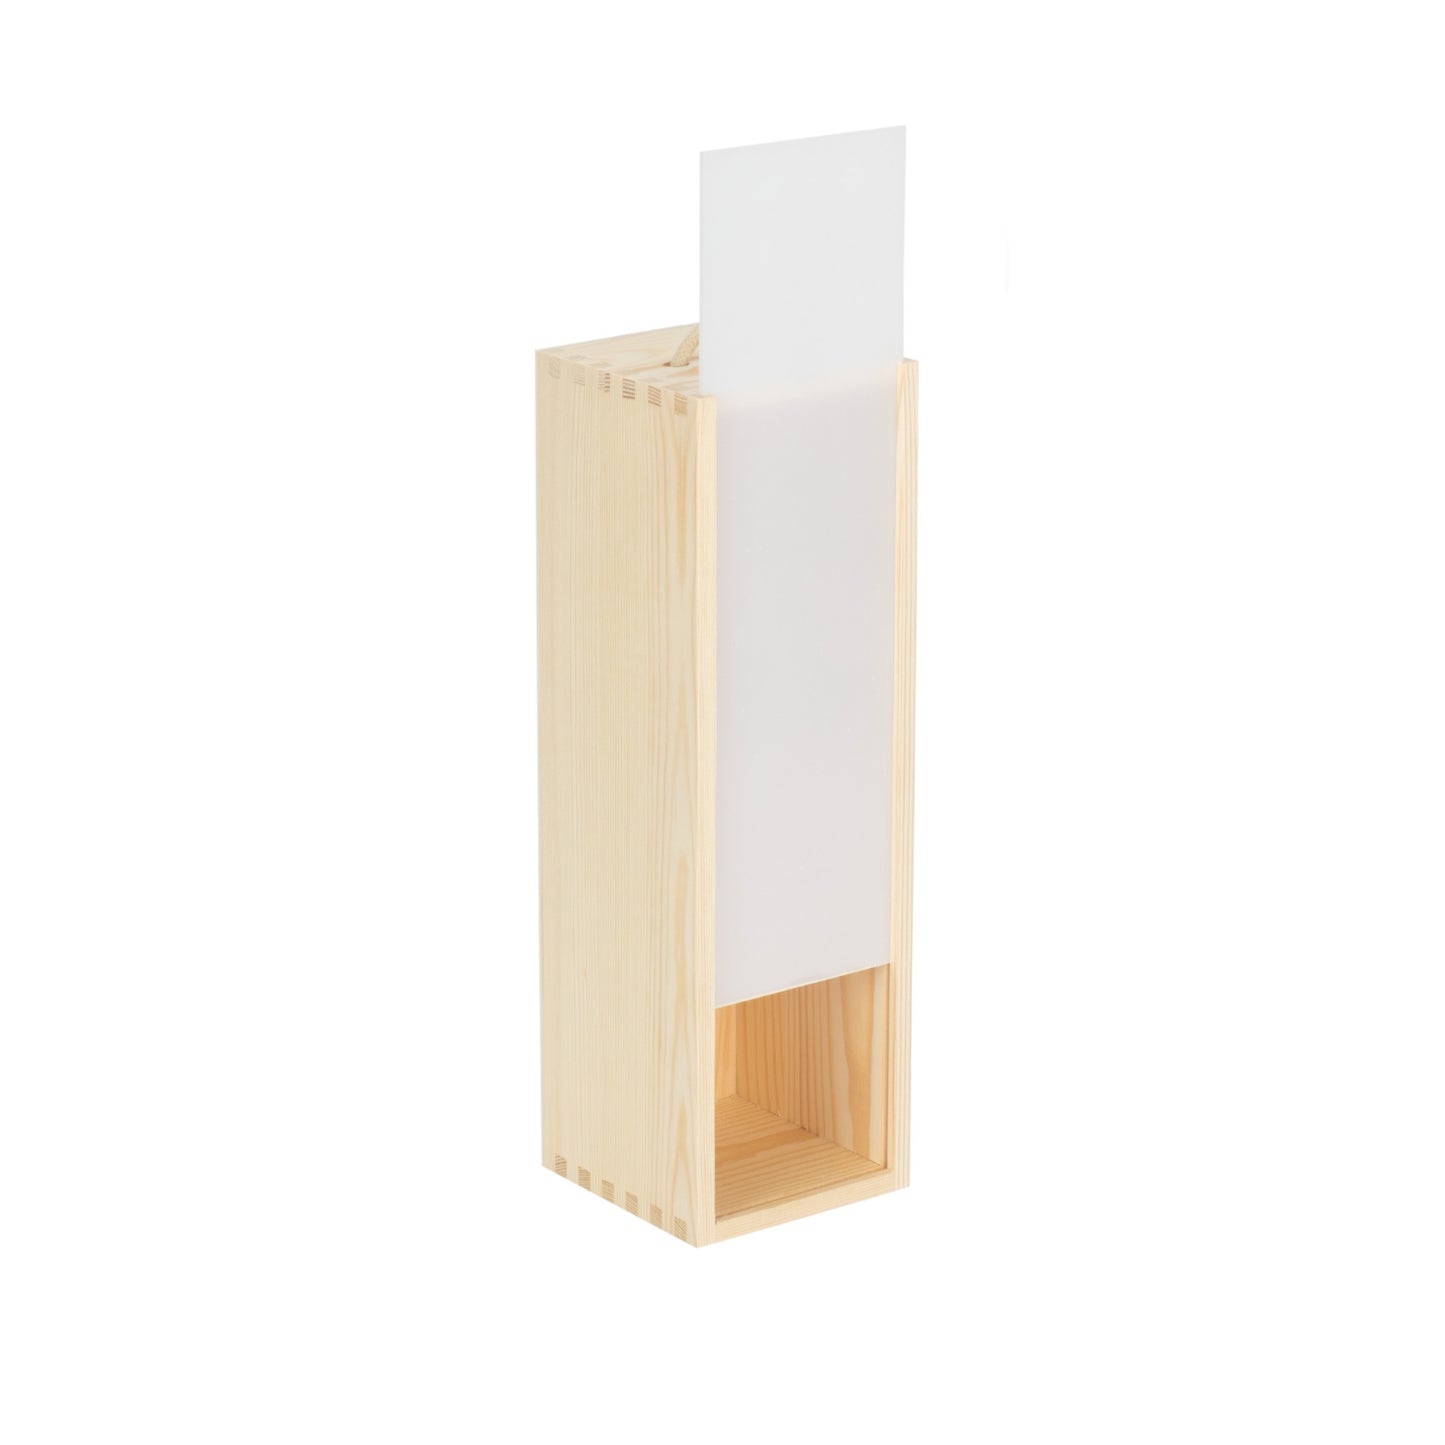 Single Bottle Wooden Box With Clear Acrylic Sliding Lid